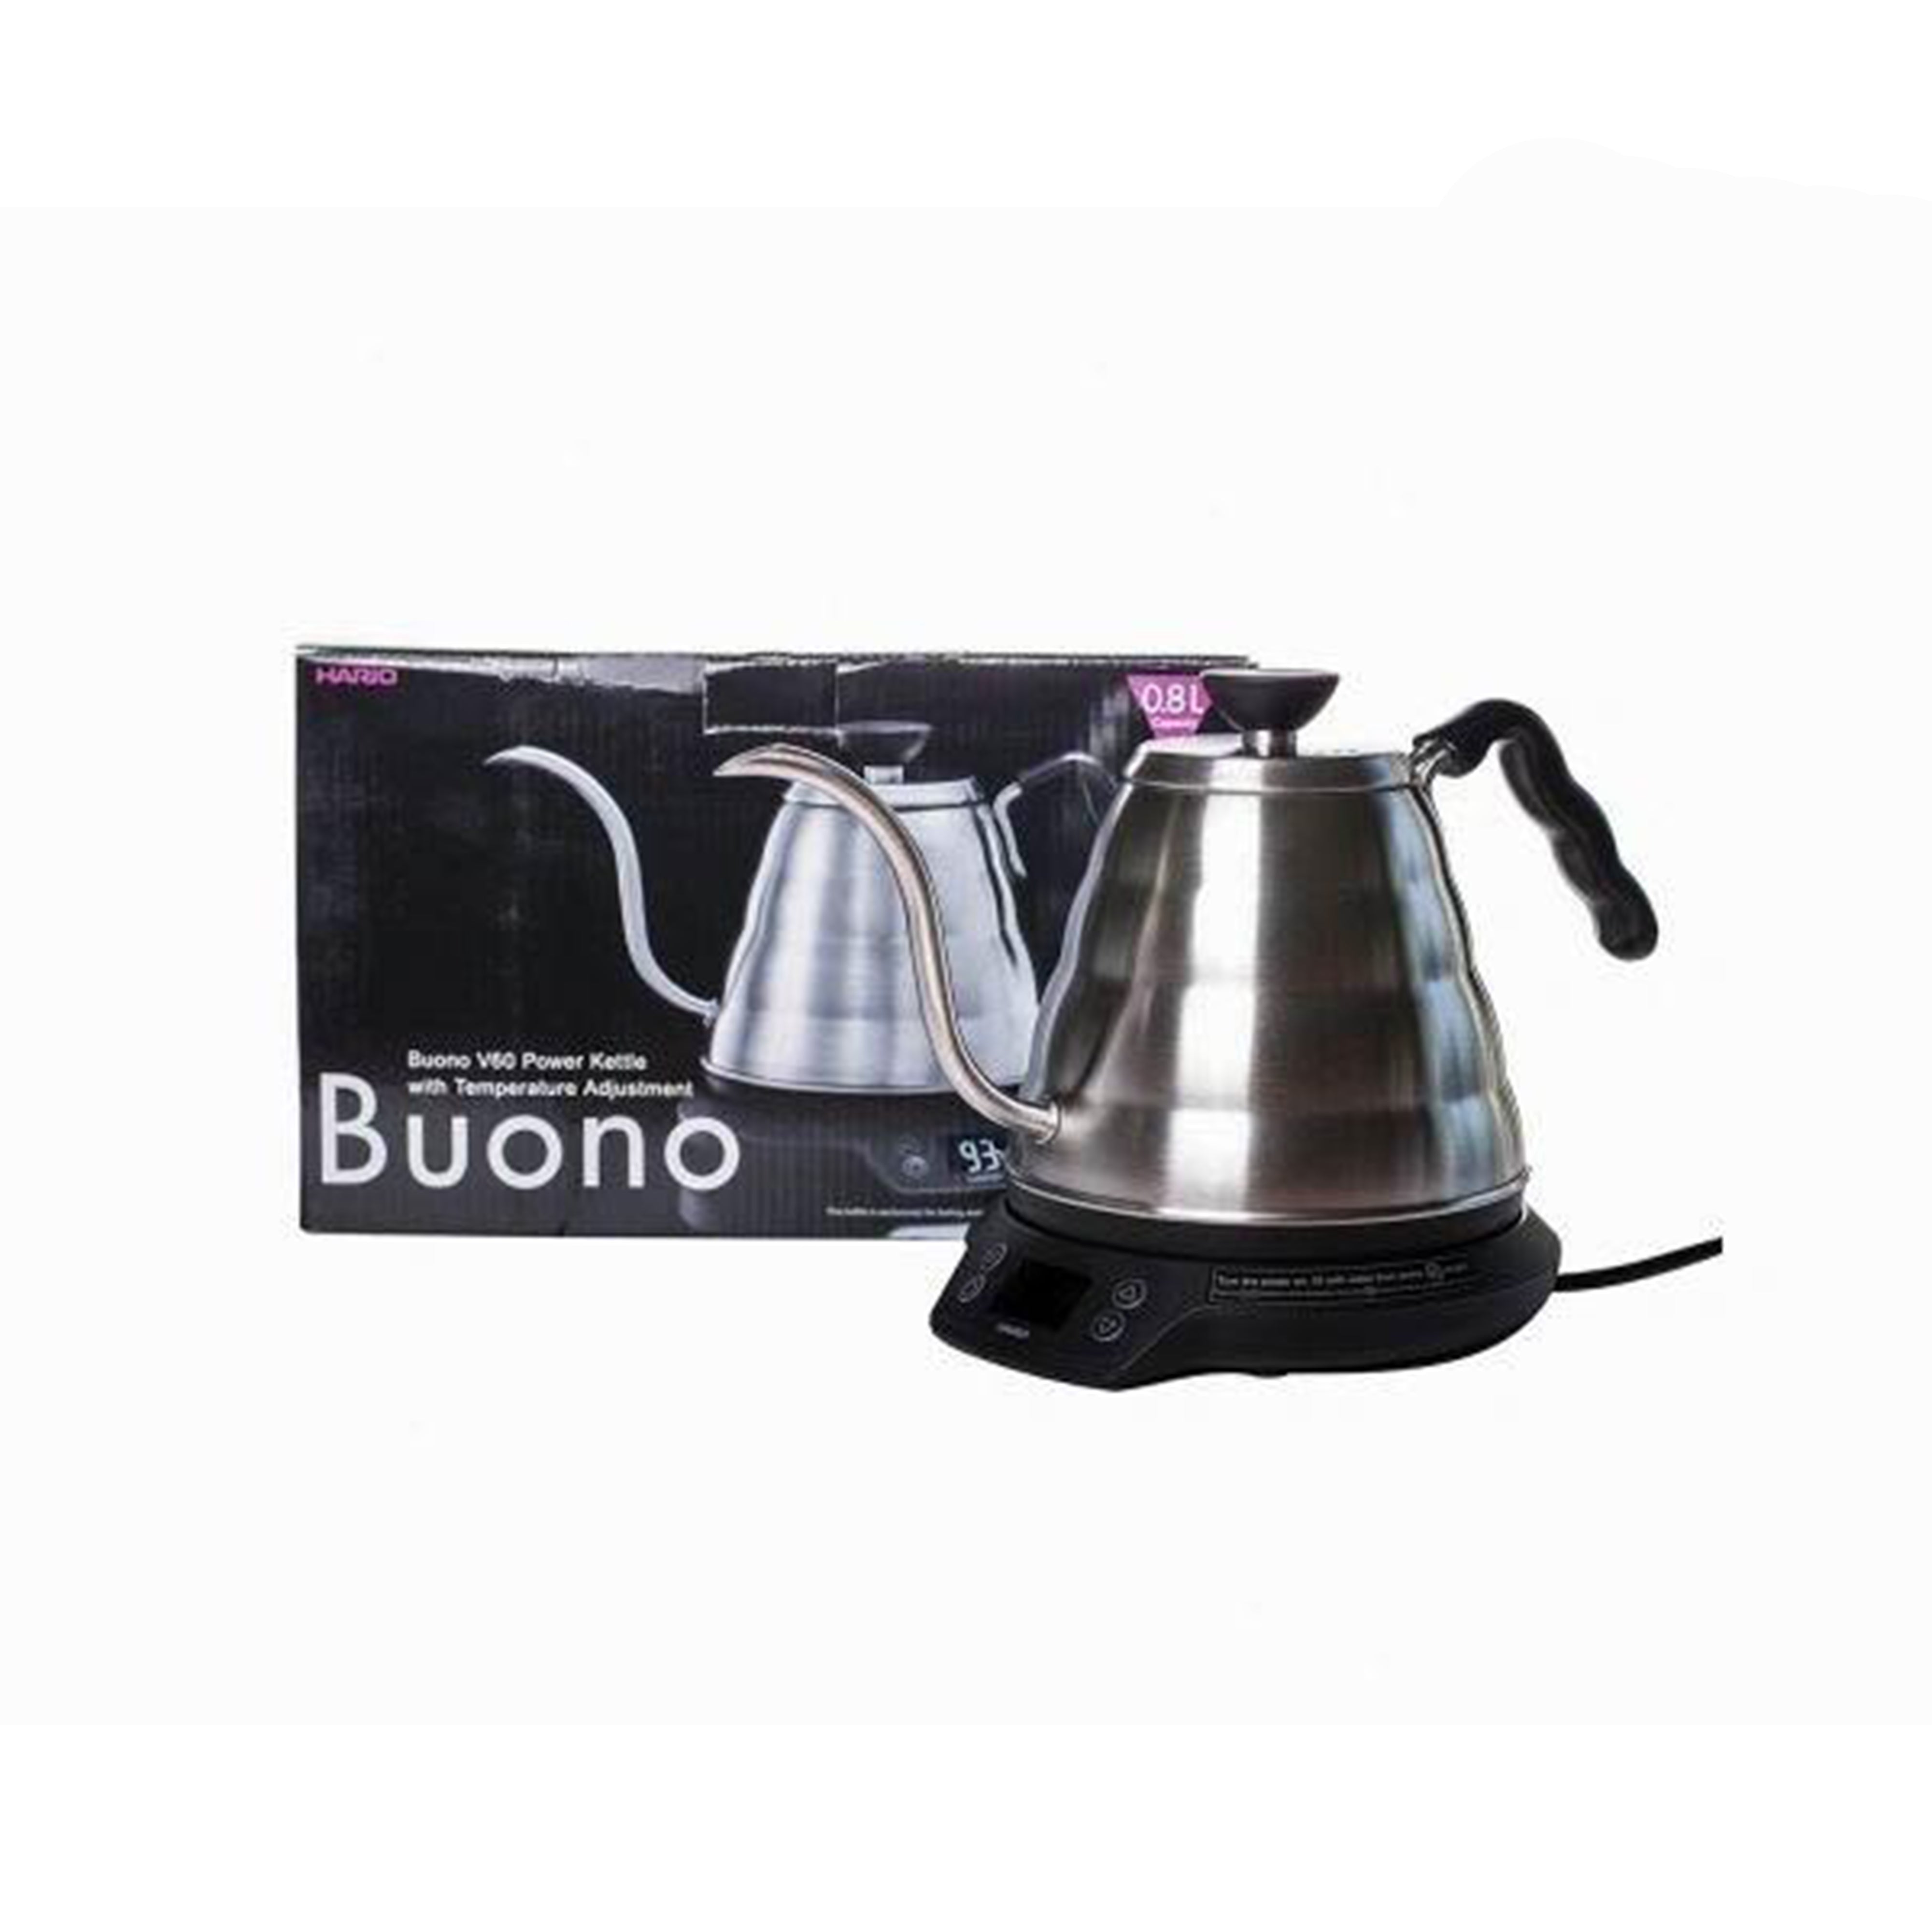 Hario Buono V60 Power Kettle With Temperature Control in Stainless